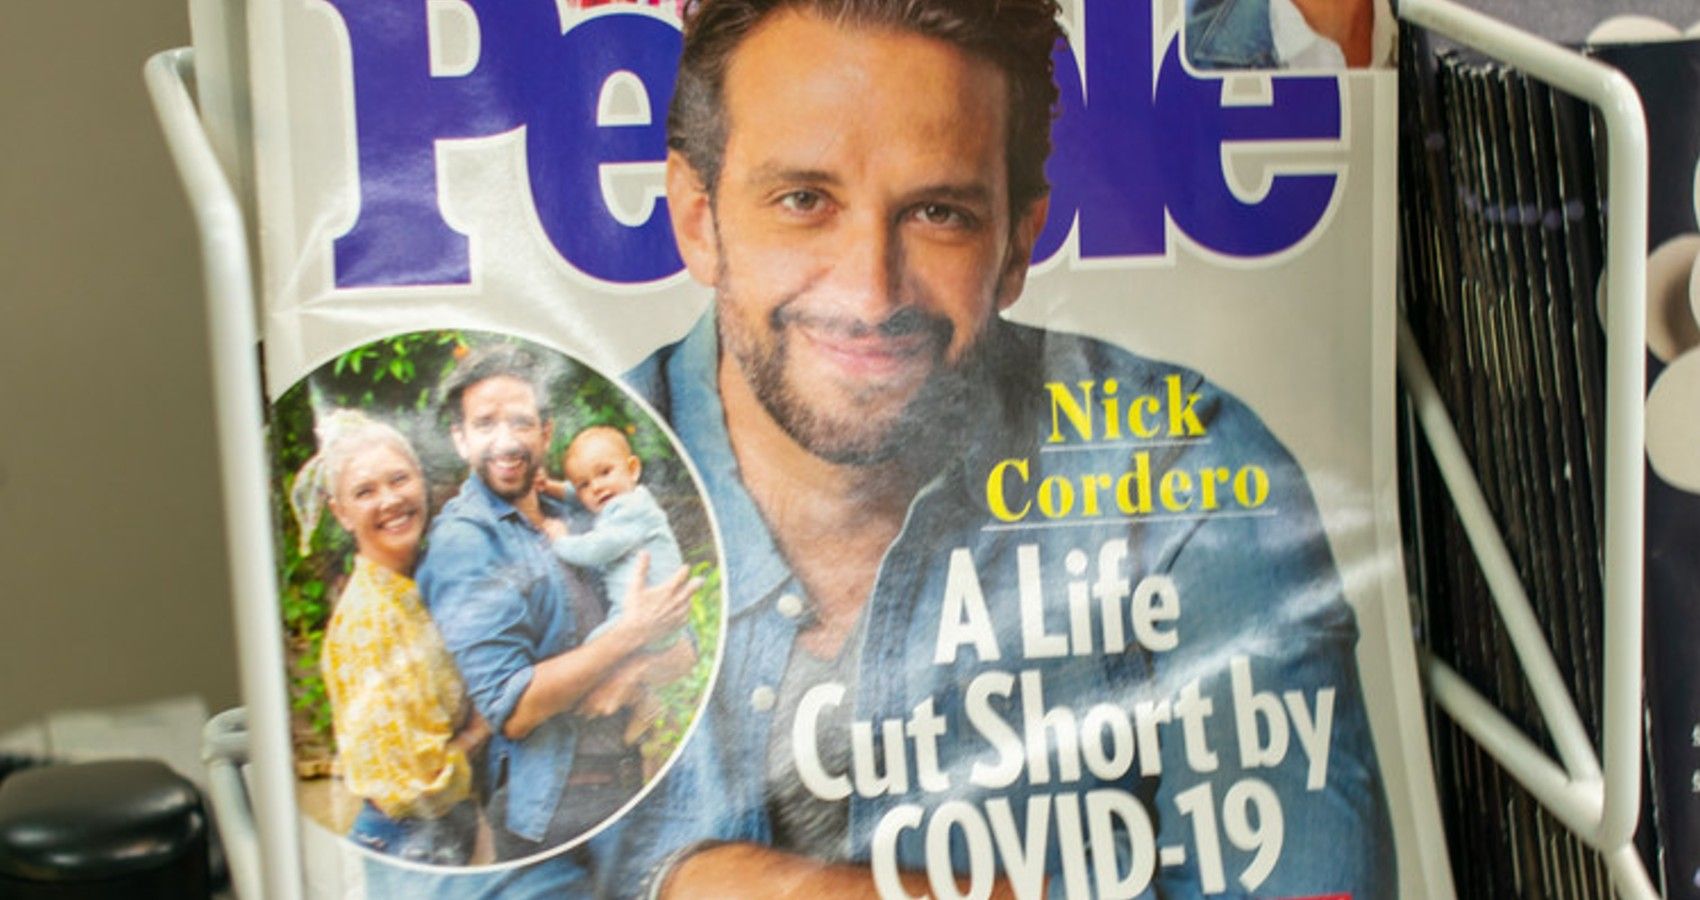 A Picture Of Nick Cordero And Family On Magazine